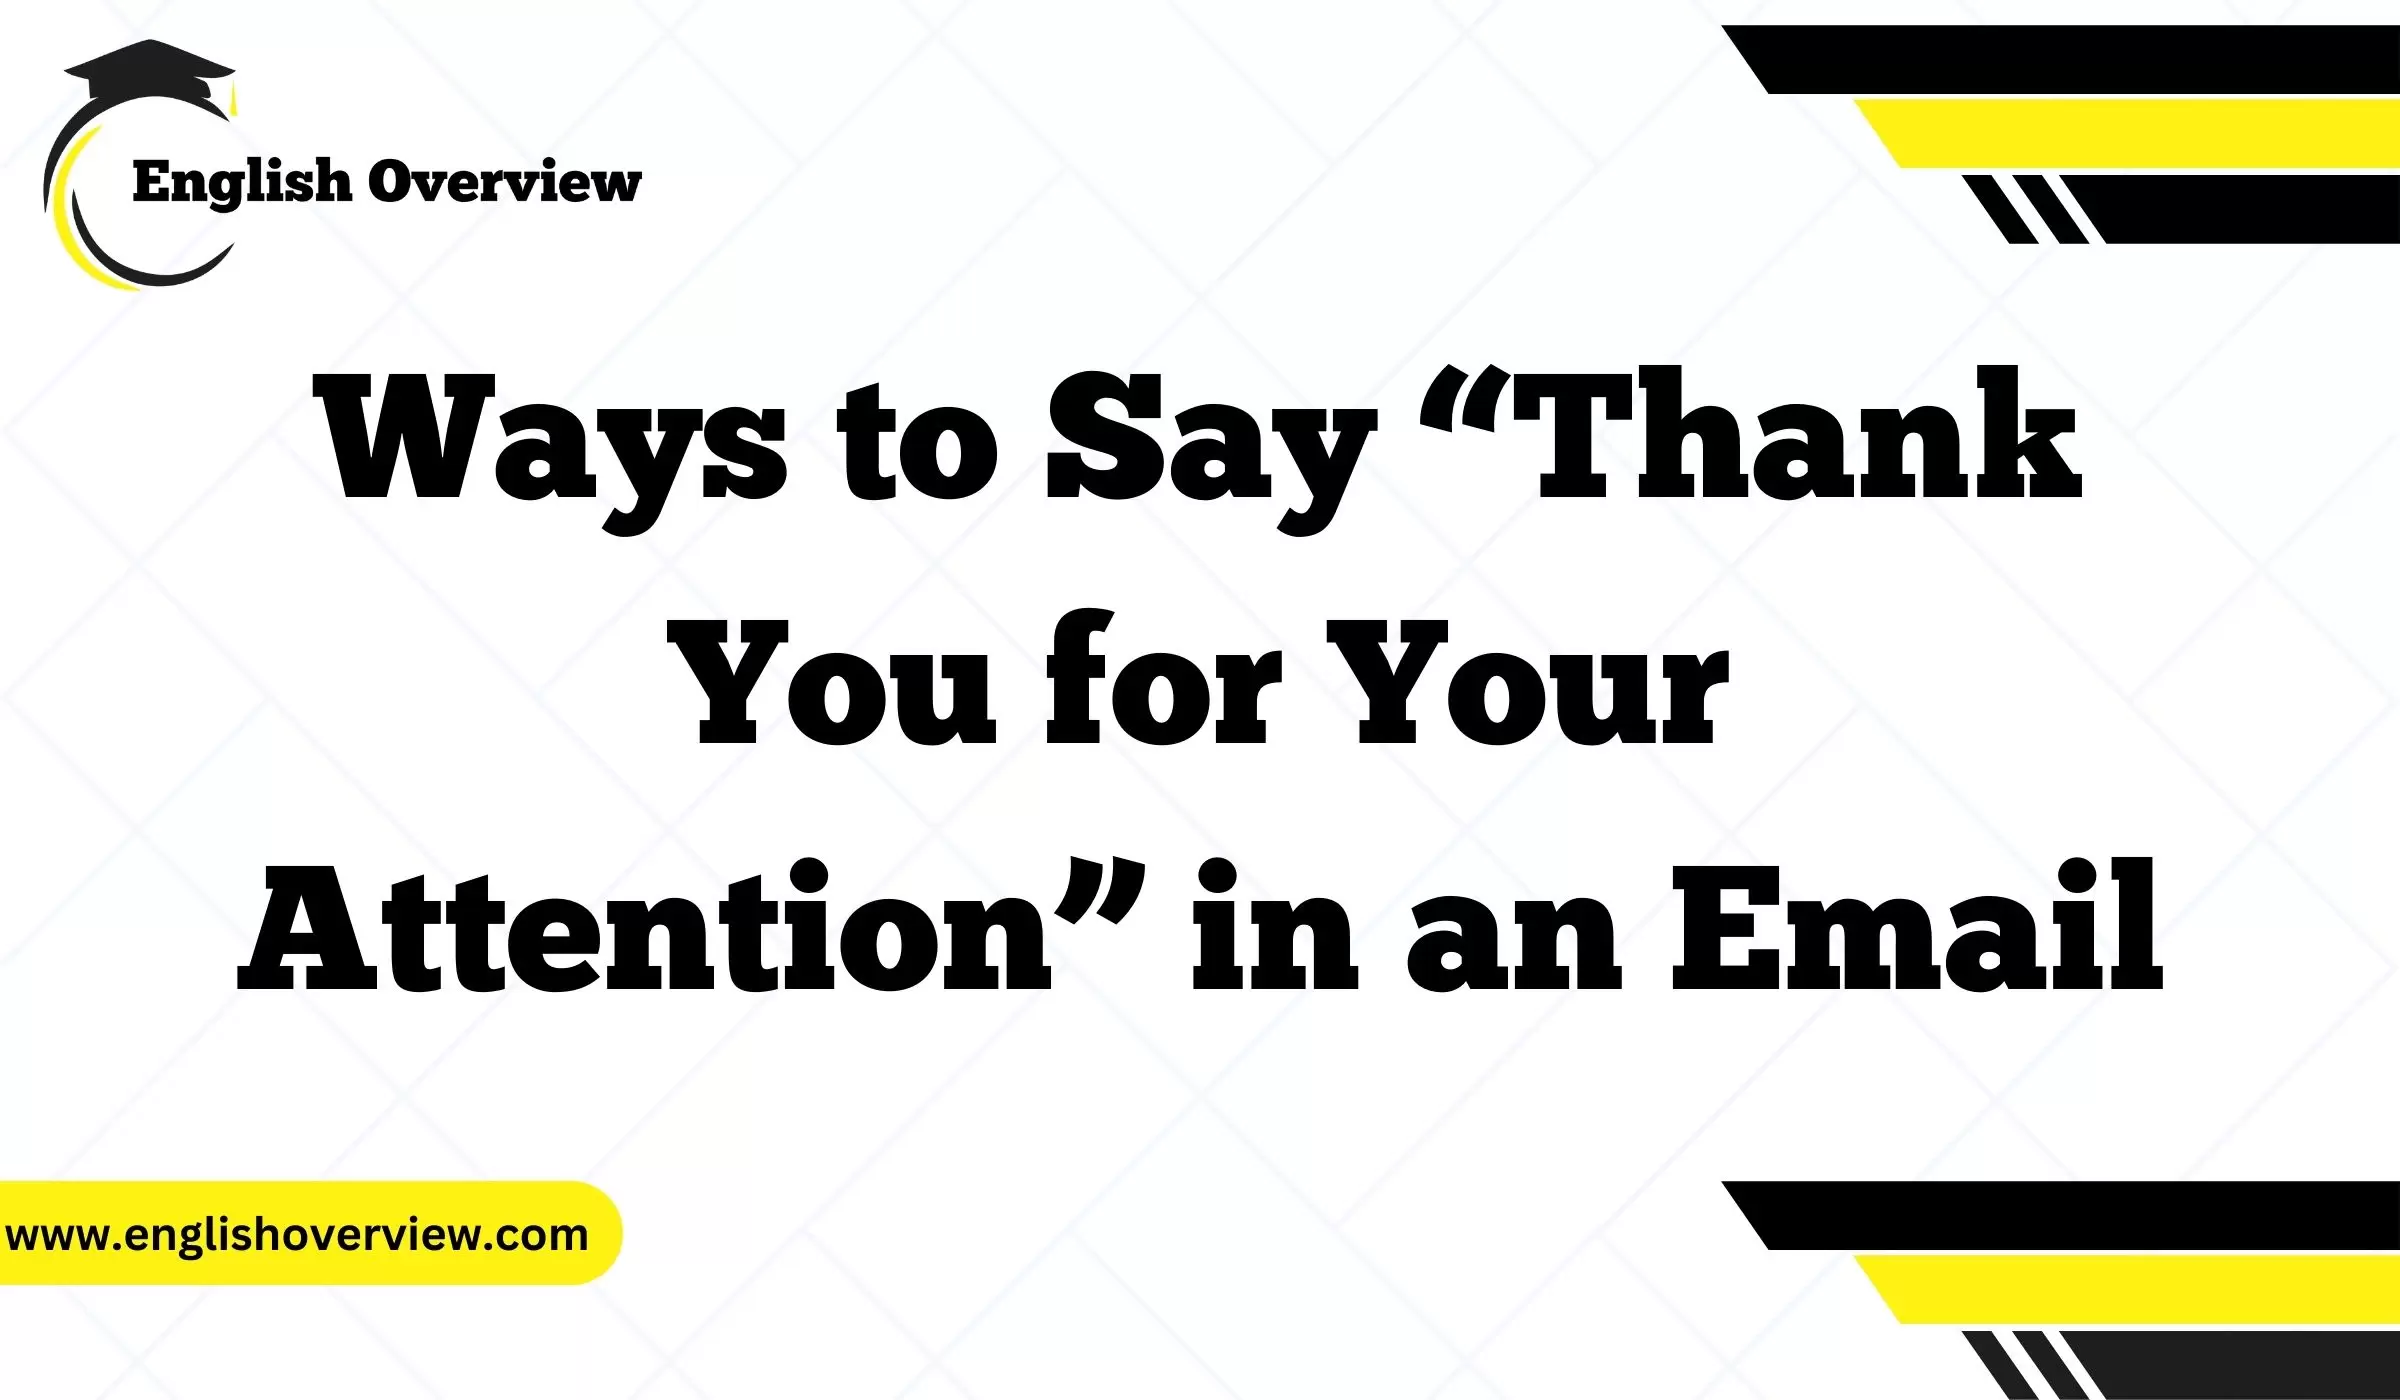 Ways to Say “Thank You for Your Attention” in an Email